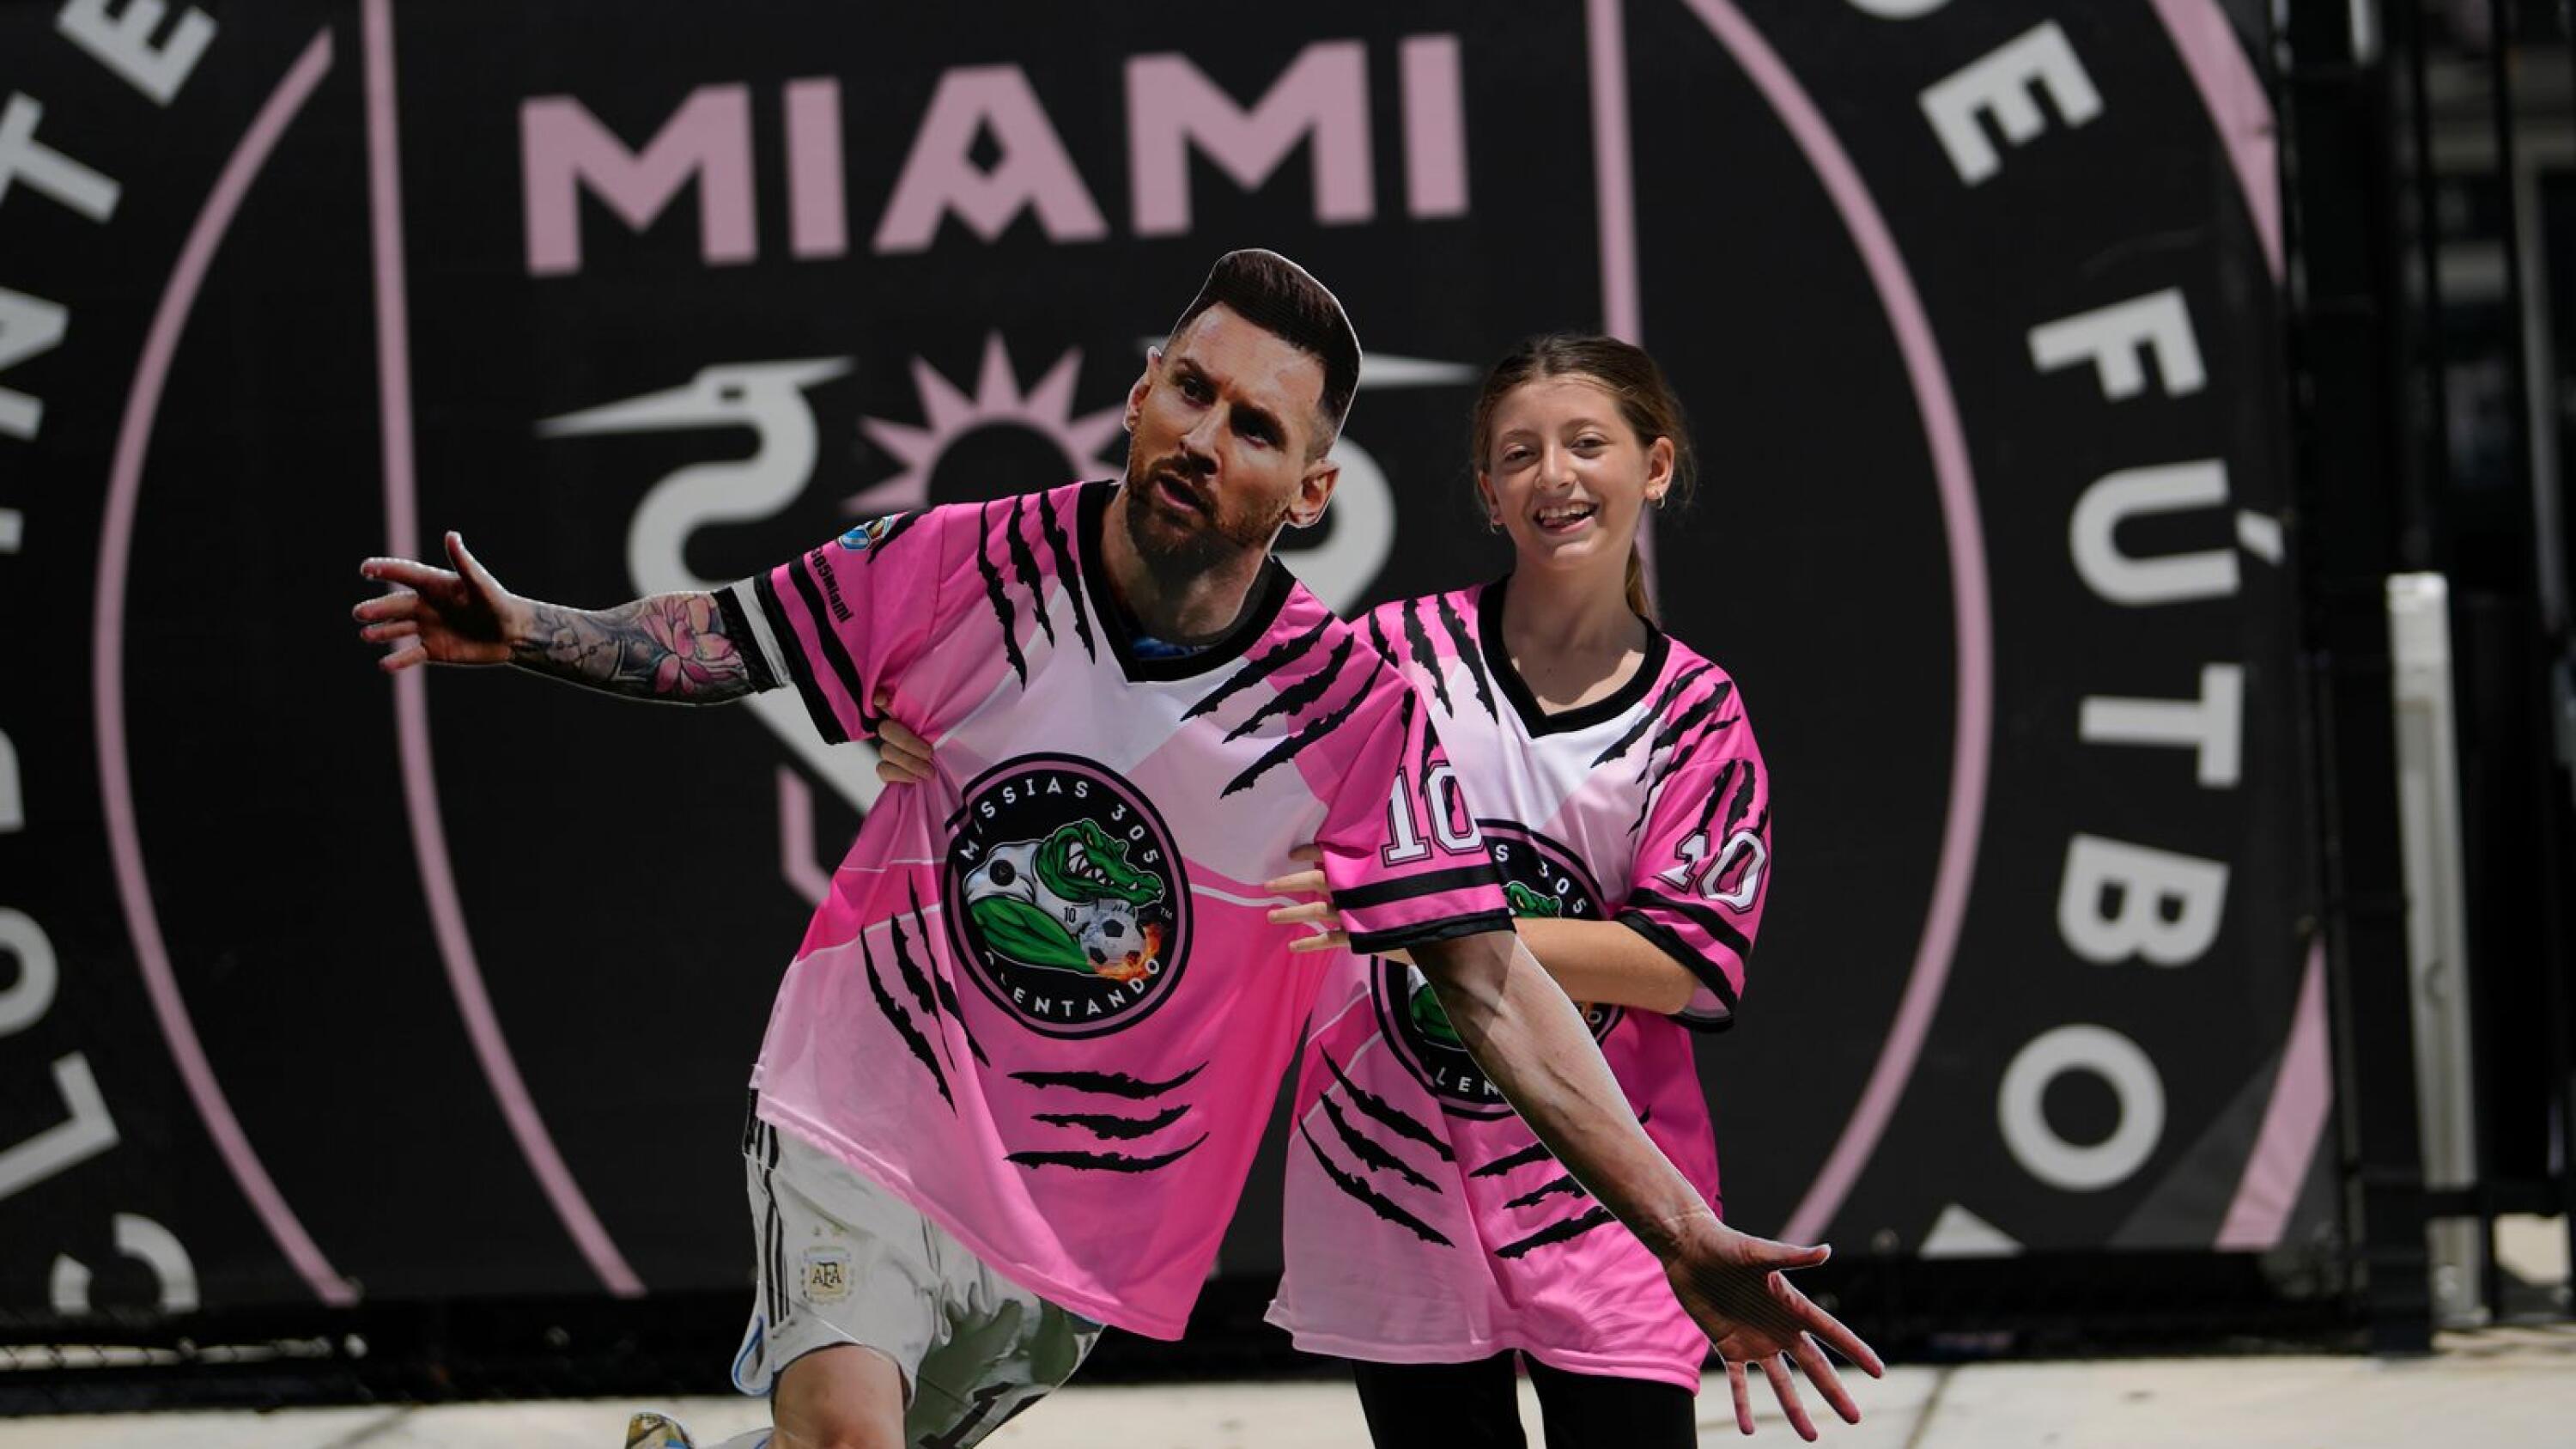 Inter Miami says no deal to play in Saudi Arabia